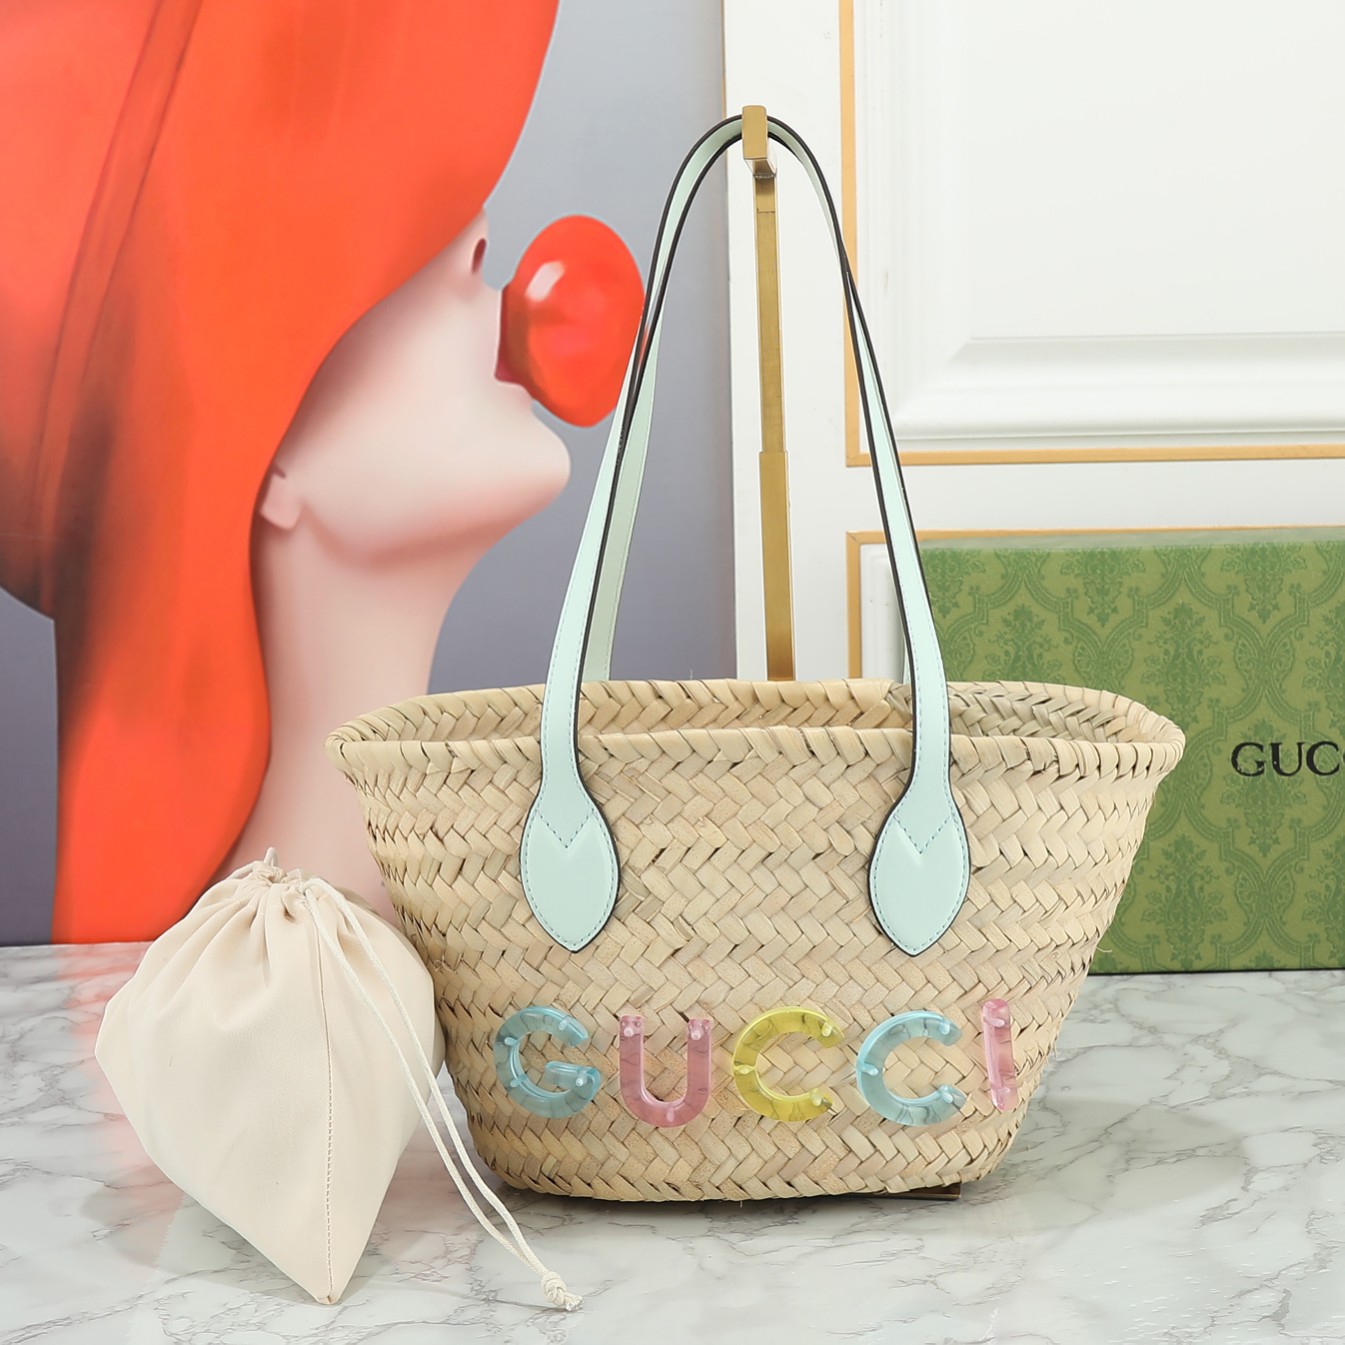 Gucci Bags Handbags Weave Straw Woven Vintage